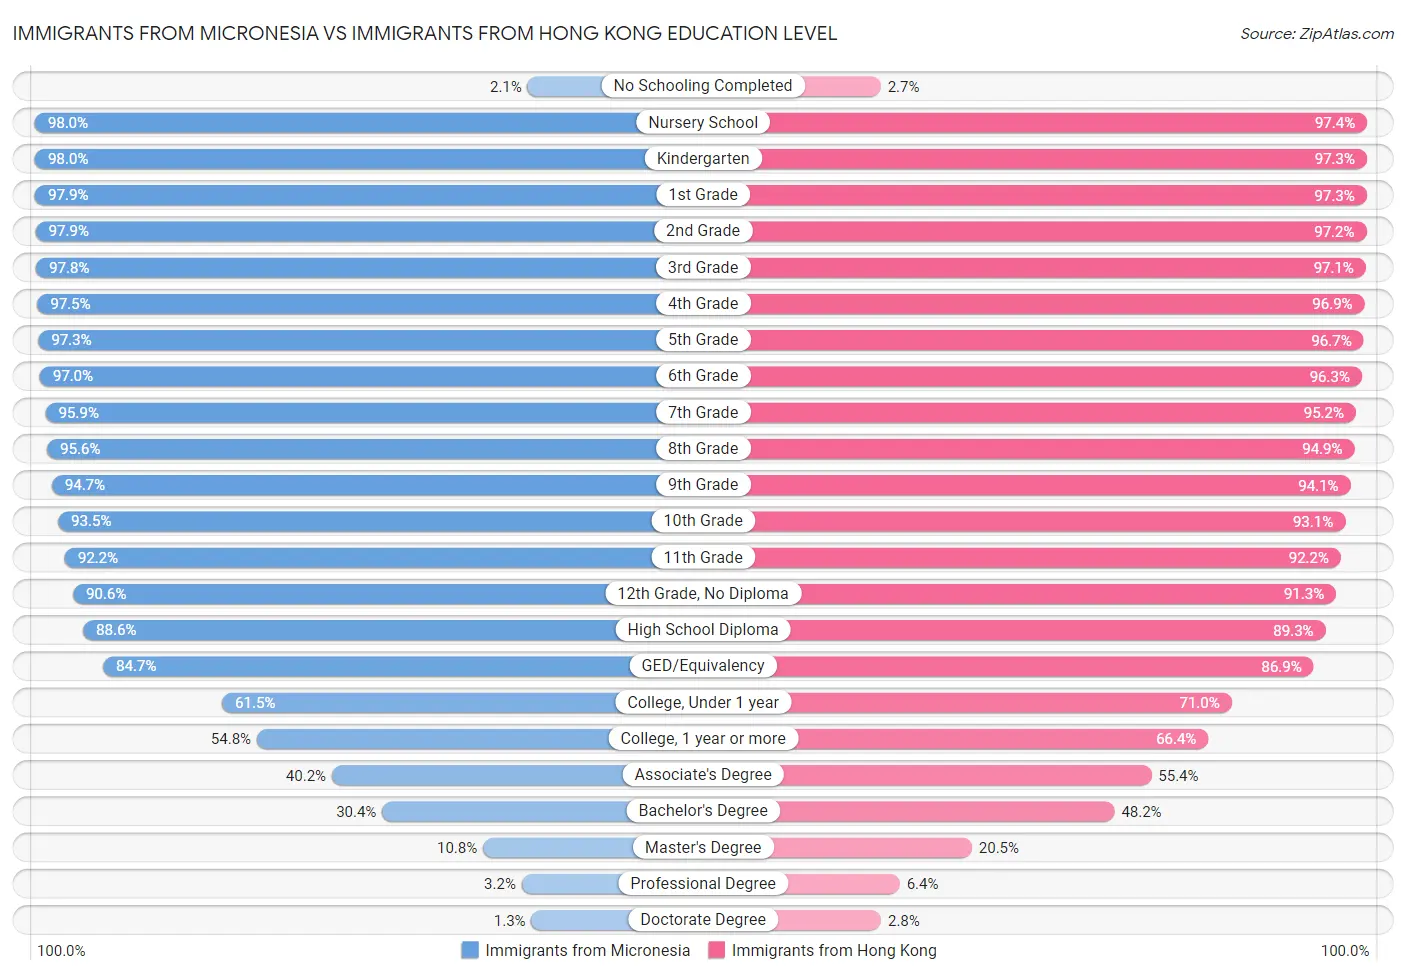 Immigrants from Micronesia vs Immigrants from Hong Kong Education Level